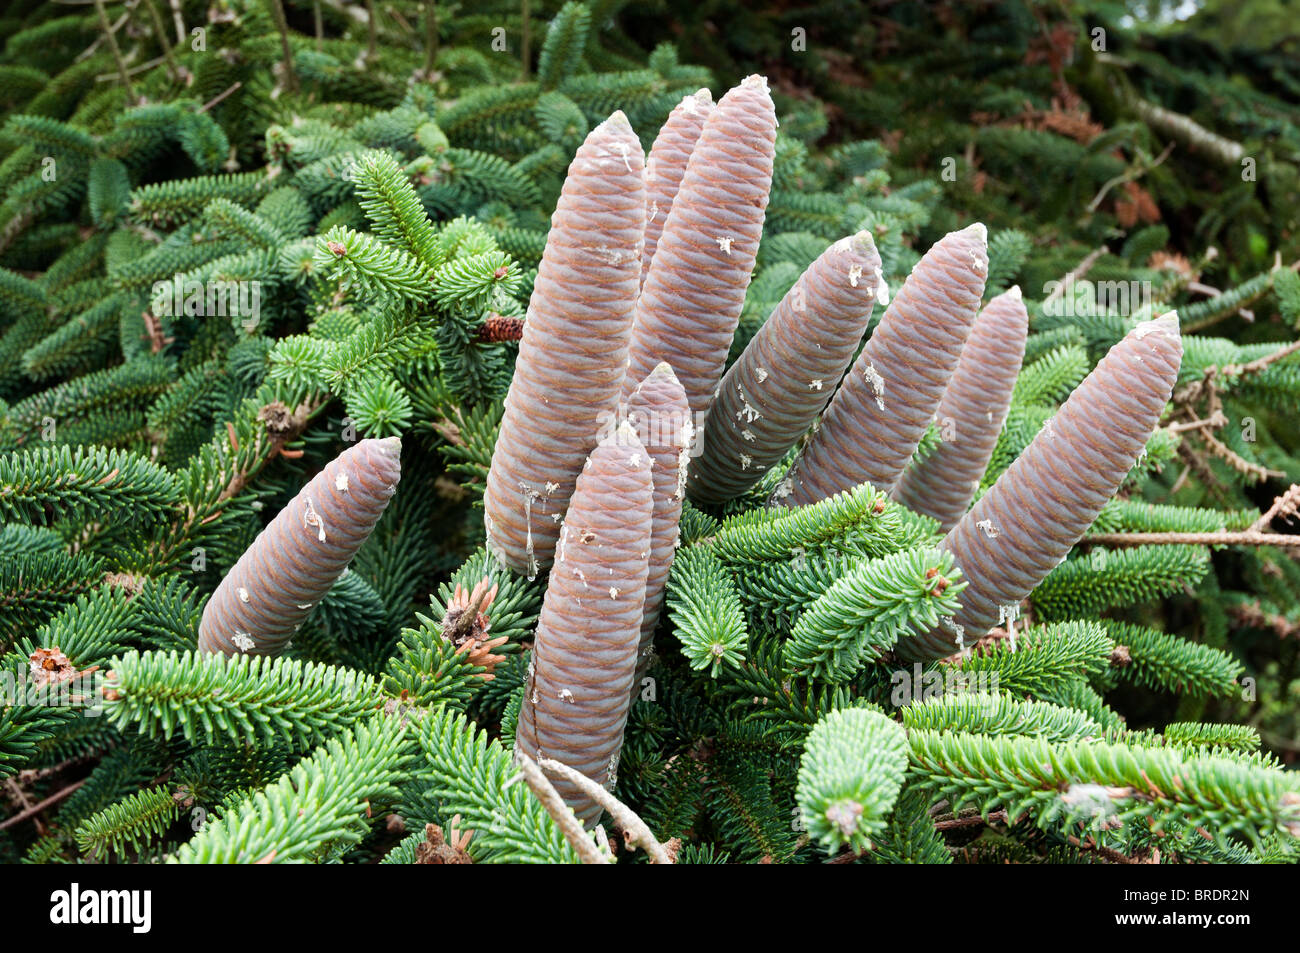 Spanish Fir, Abies pinsapo cones in August Stock Photo